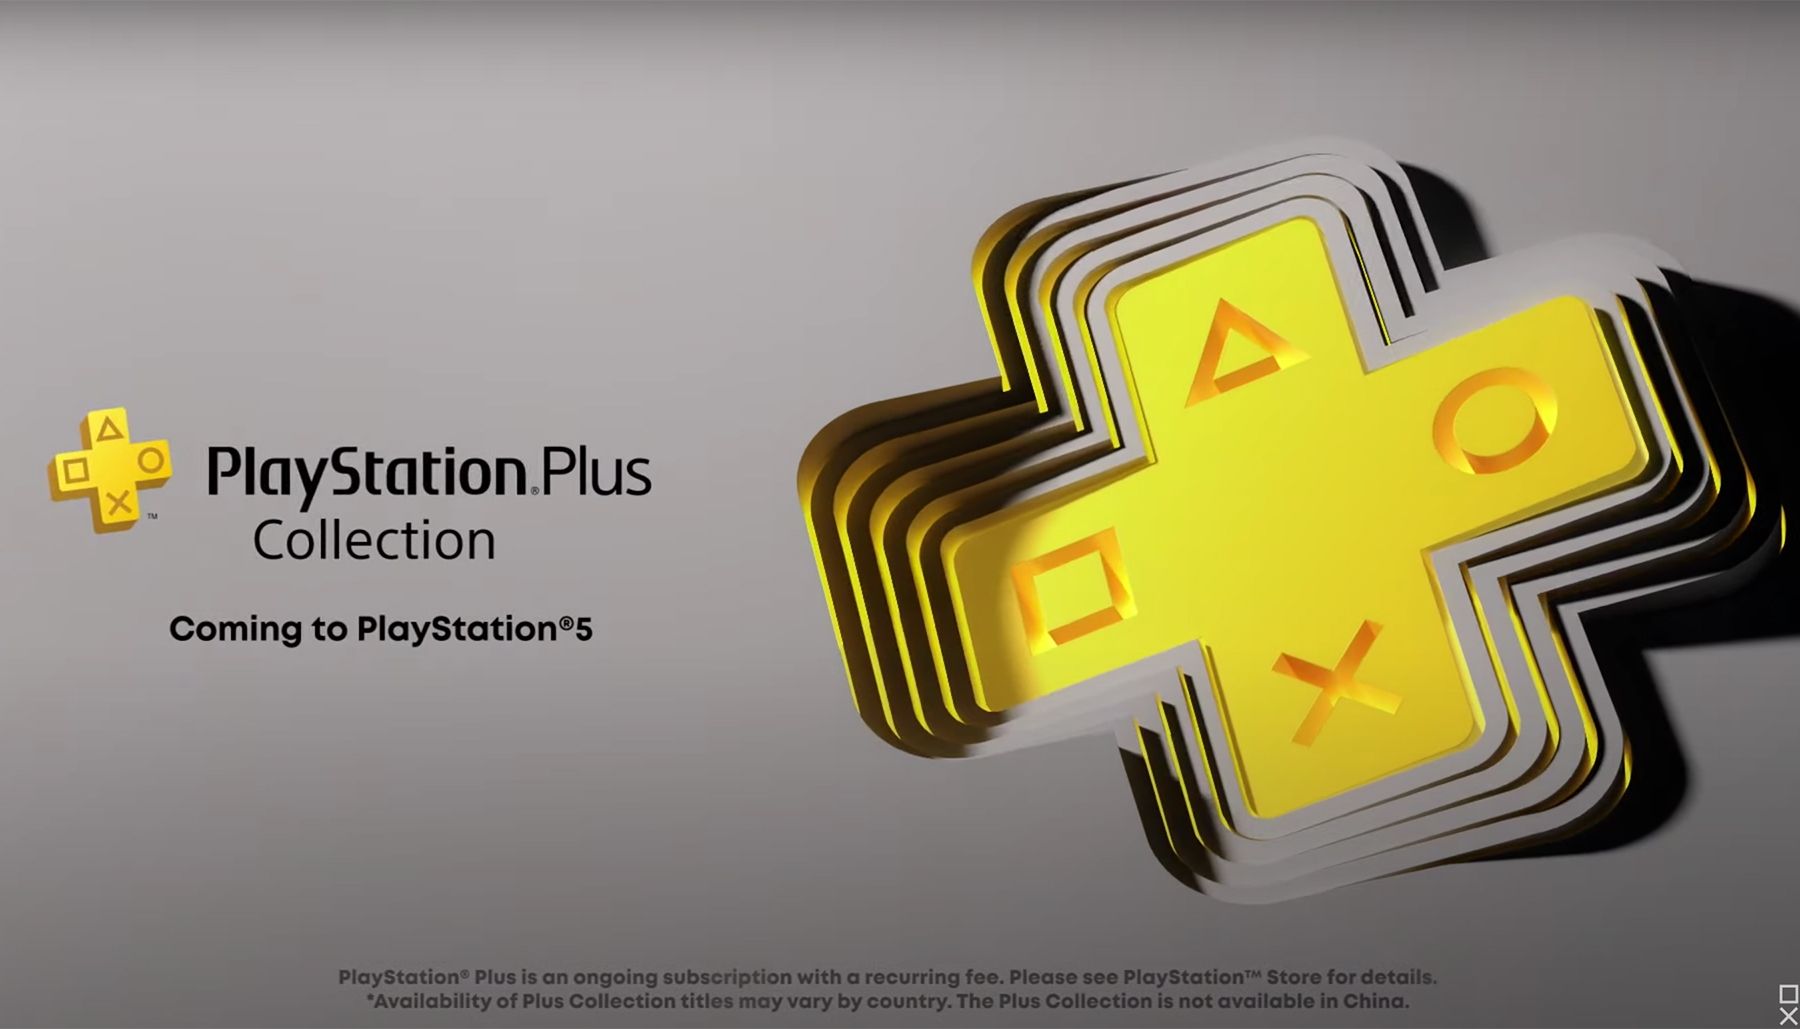 PlayStation Plus Collection offers PS5 Plus Subscribers Variety of PS4